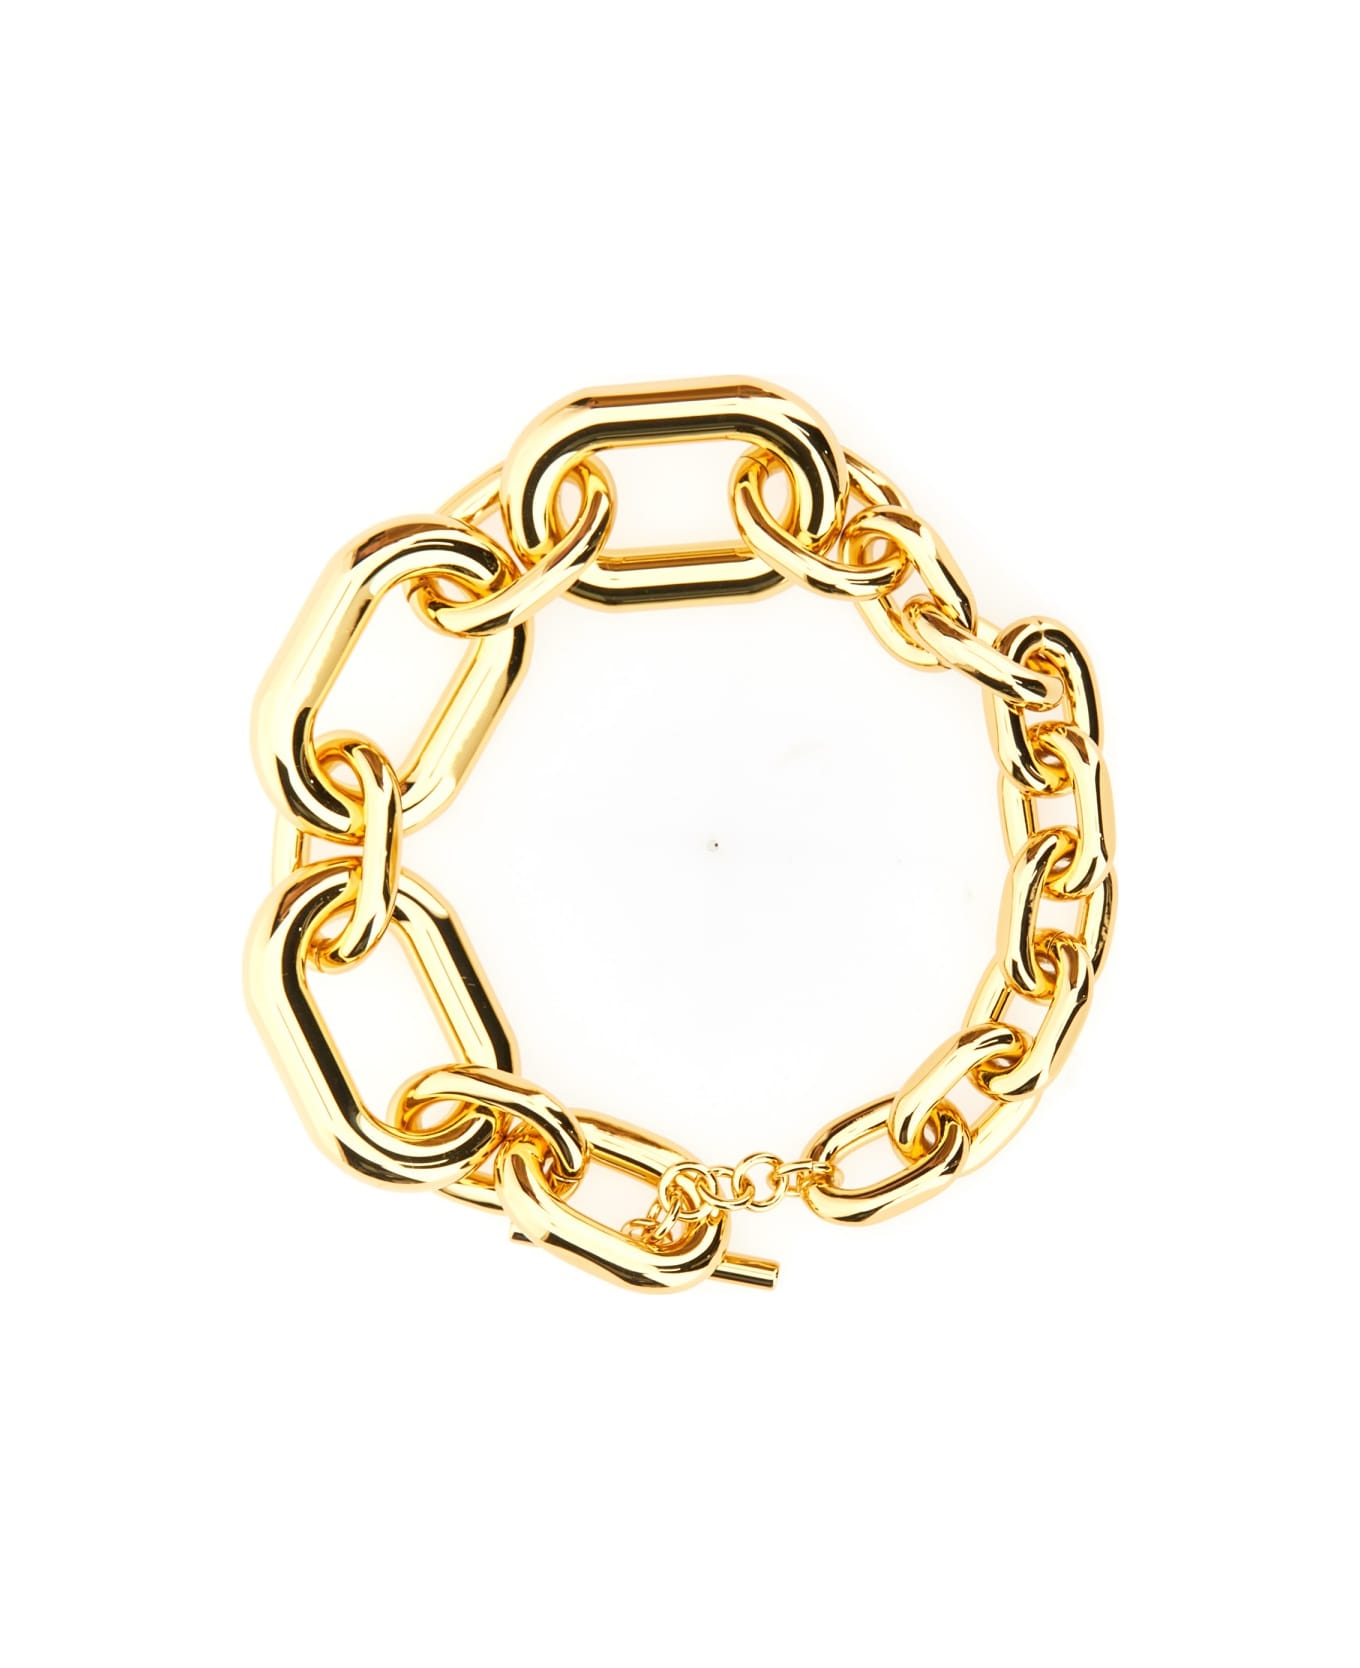 Paco Rabanne 'xl Link' Necklace - GOLD ネックレス